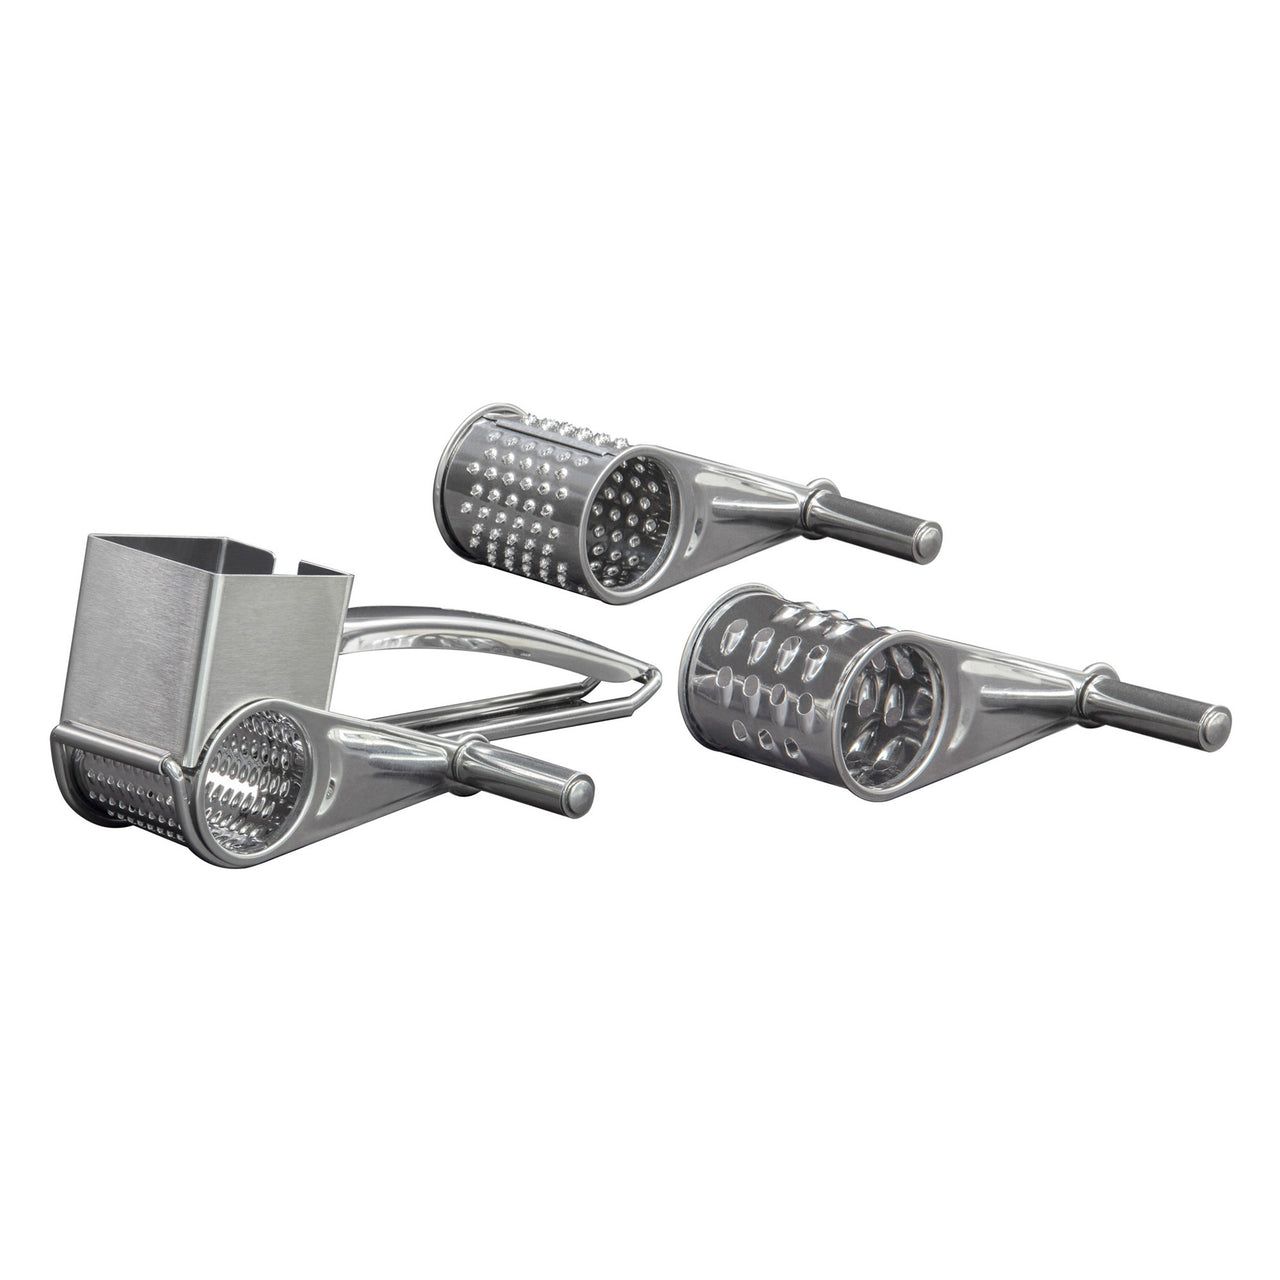 4 Piece Deluxe Rotary Grater Set